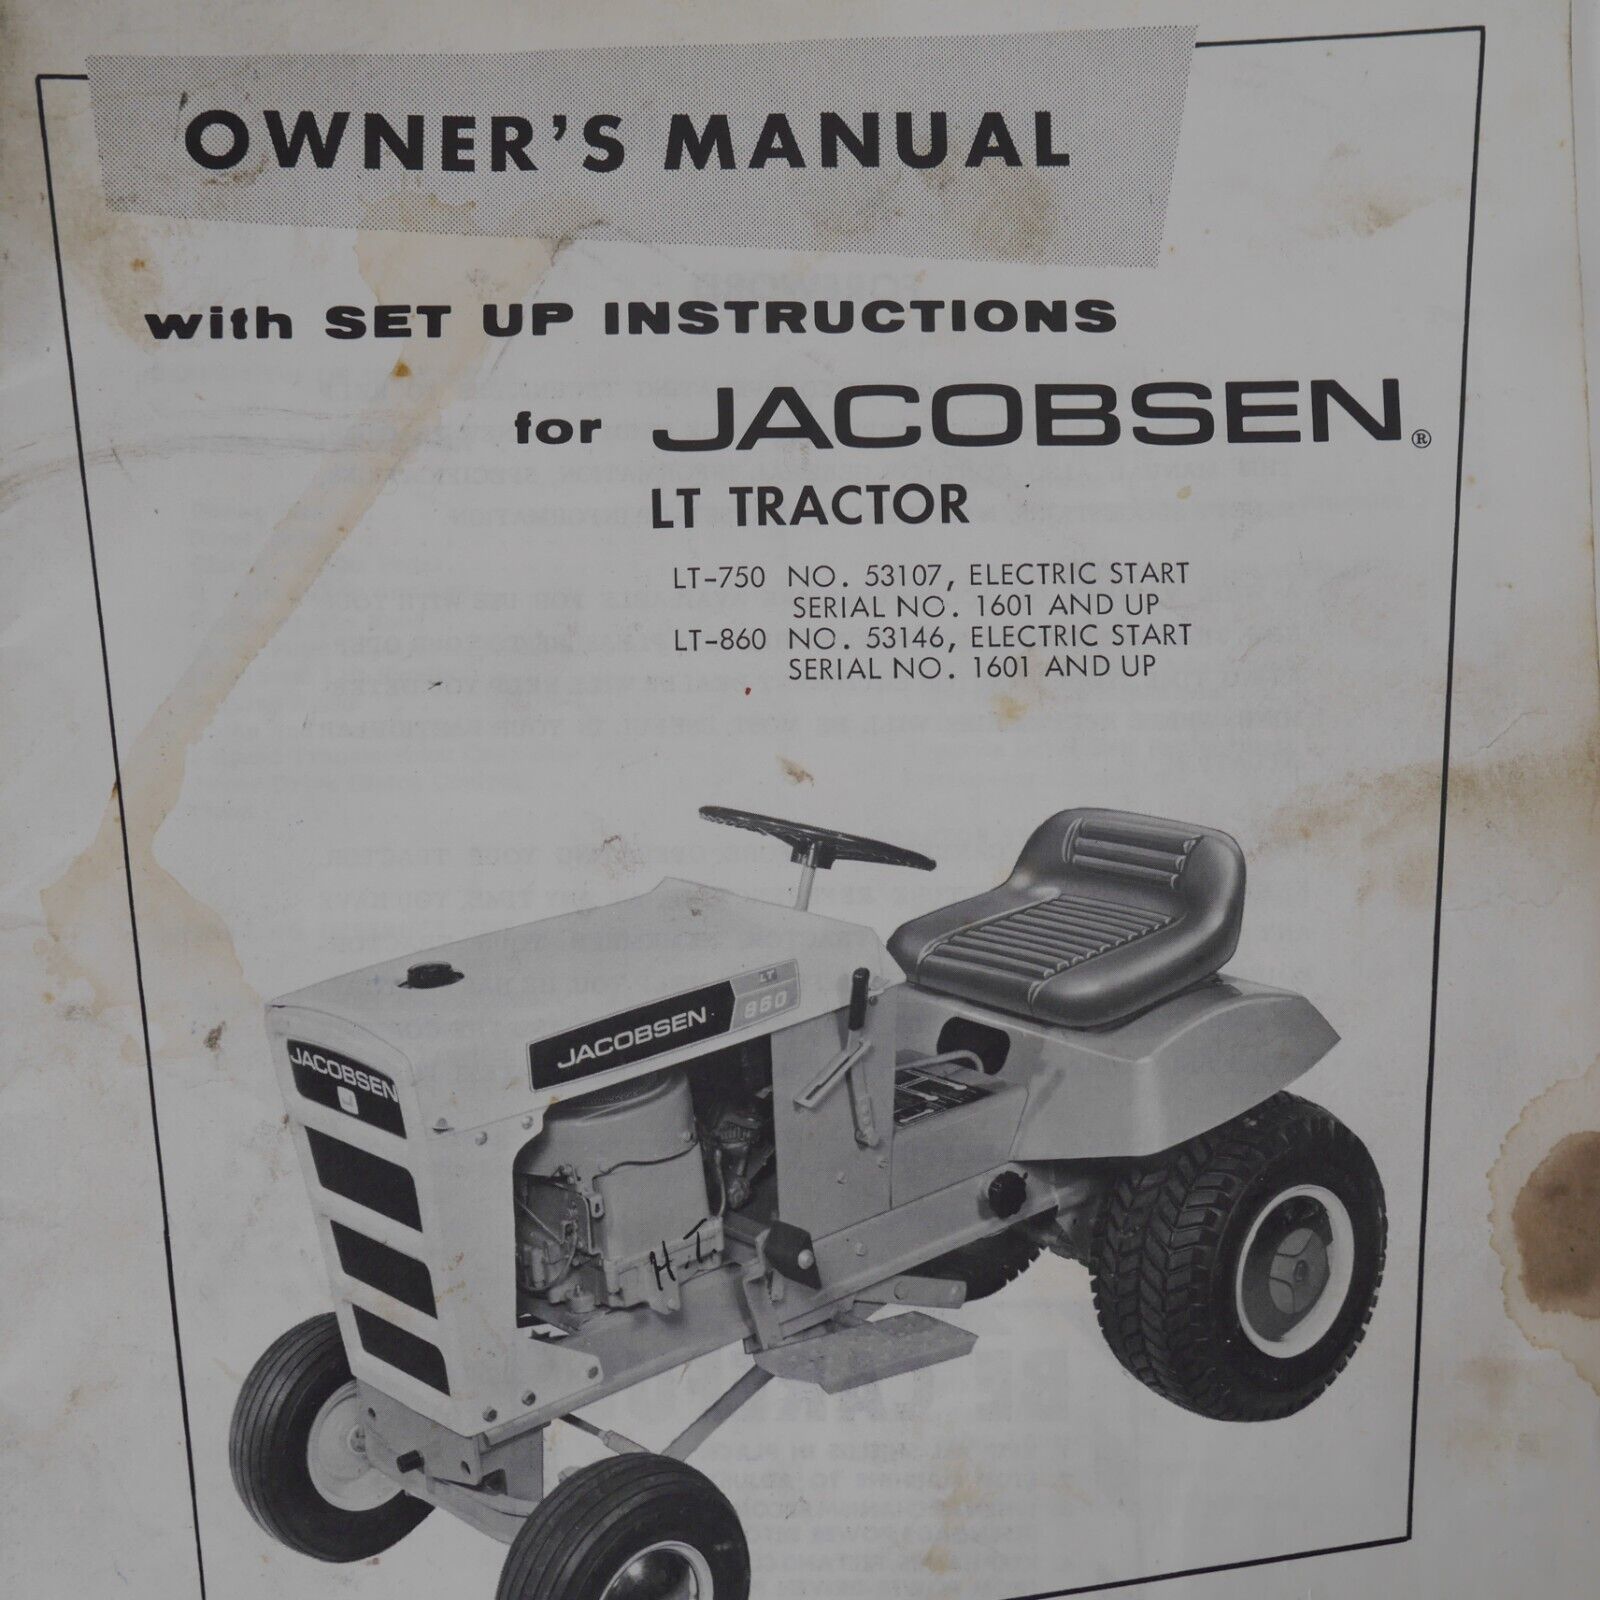 Vintage Jacobsen Tractor Manual Lt-750 Lt-860 53107 53146 Serial No. 1601 And Up